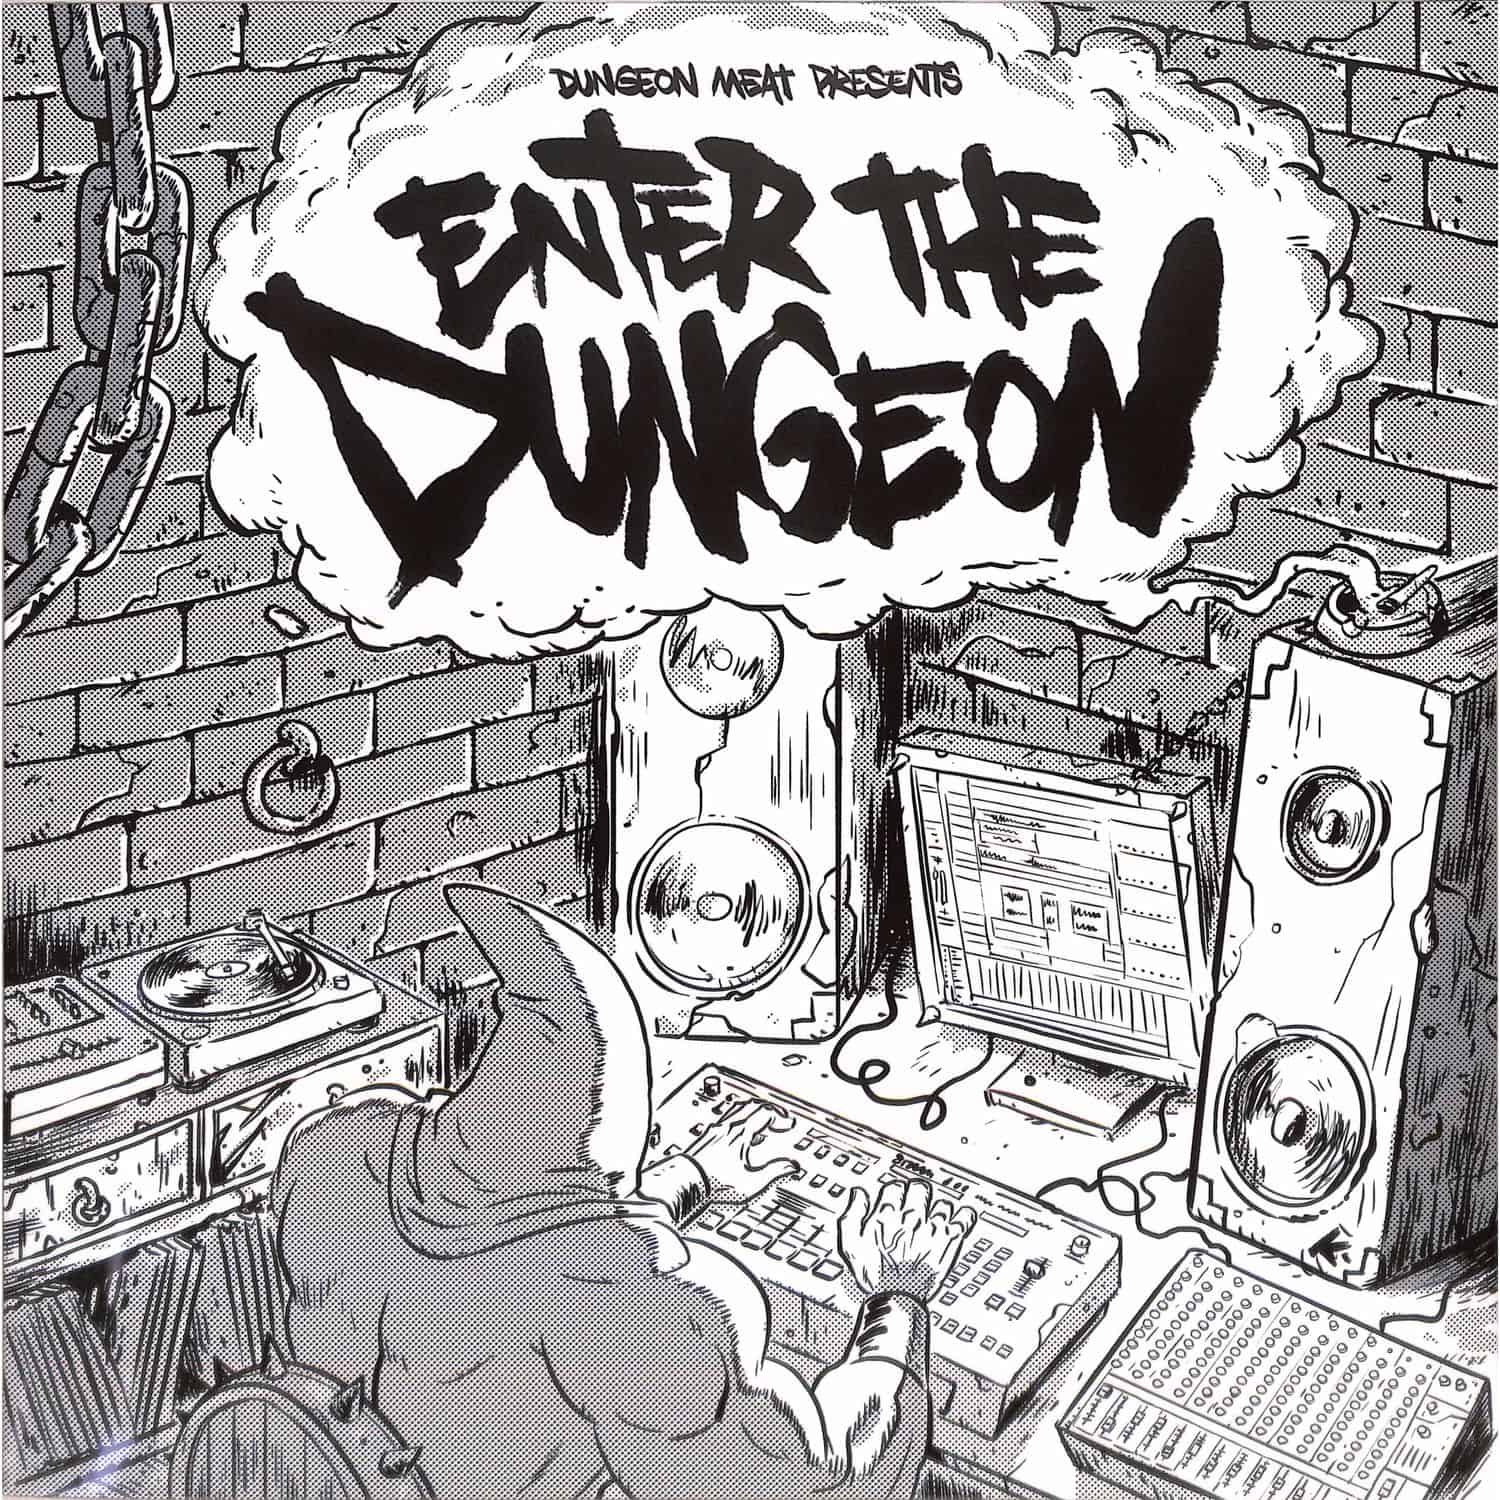 Snad / Oward / 2Hot2Handle / Incus - ENTER THE DUNGEON 